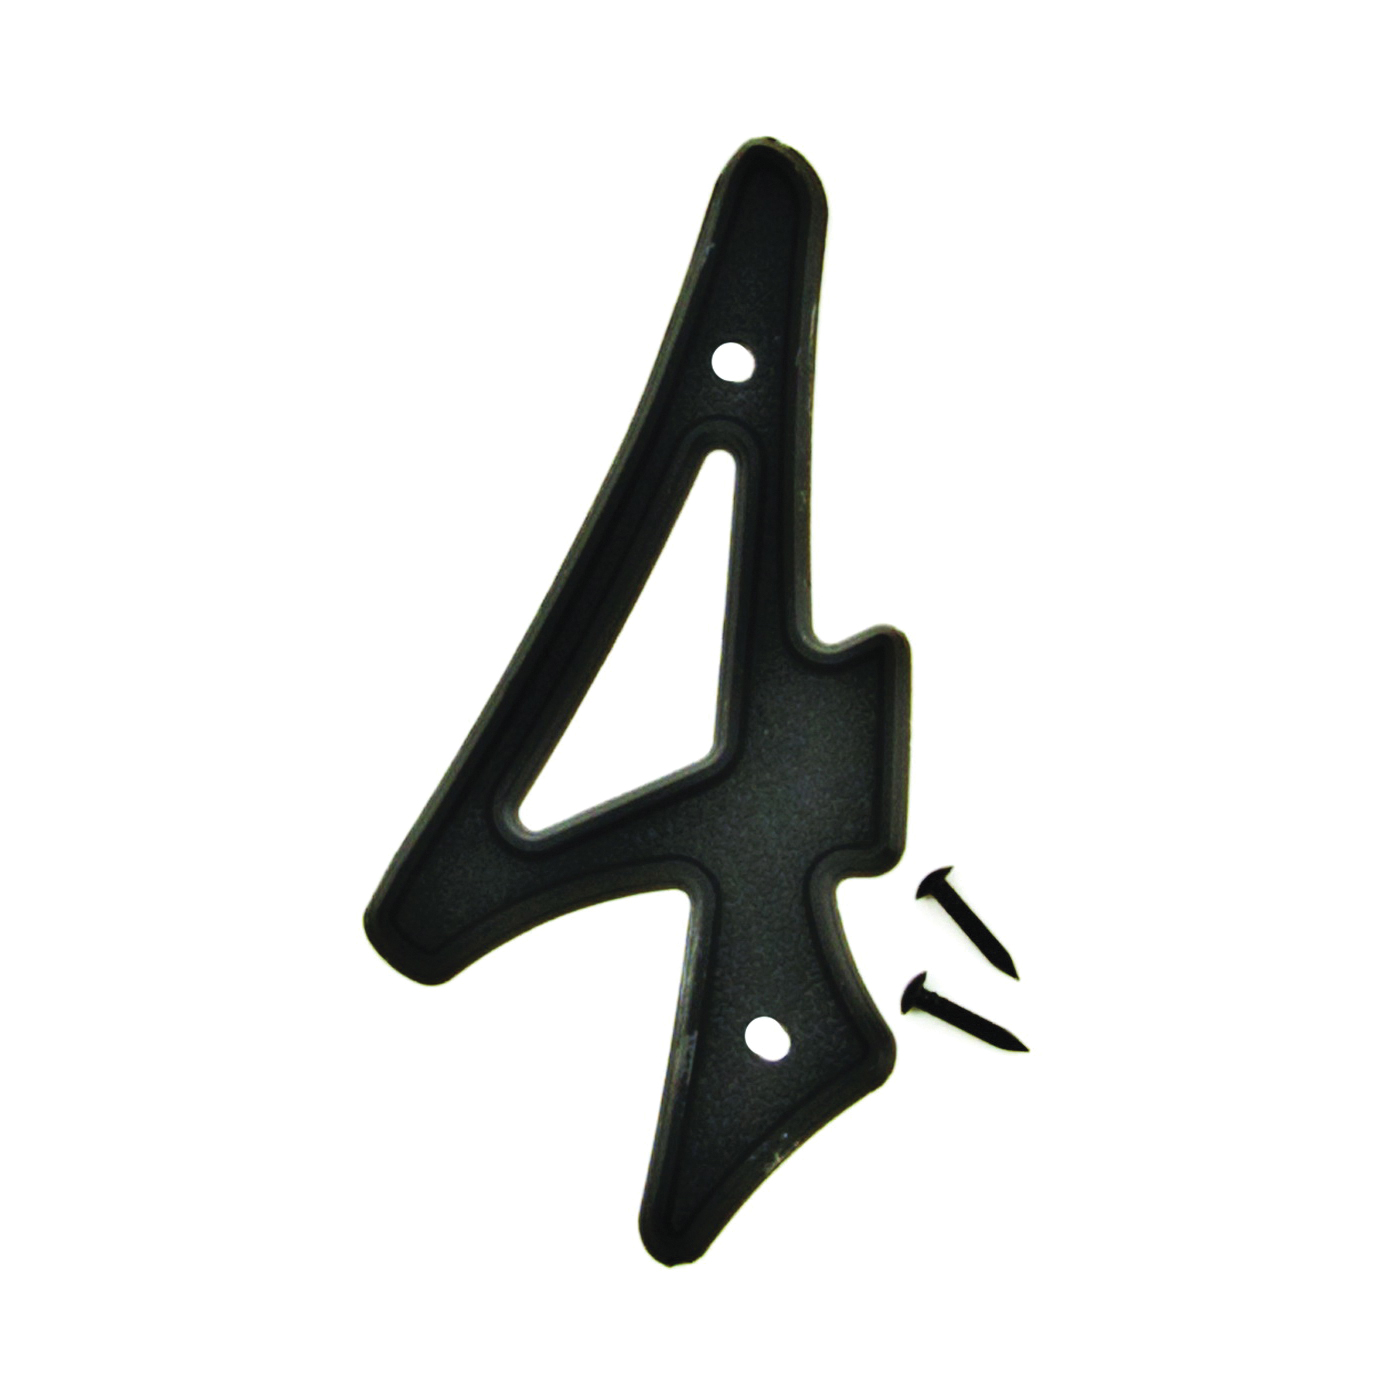 PN-29/4 House Number, Character: 4, 4 in H Character, Black Character, Plastic